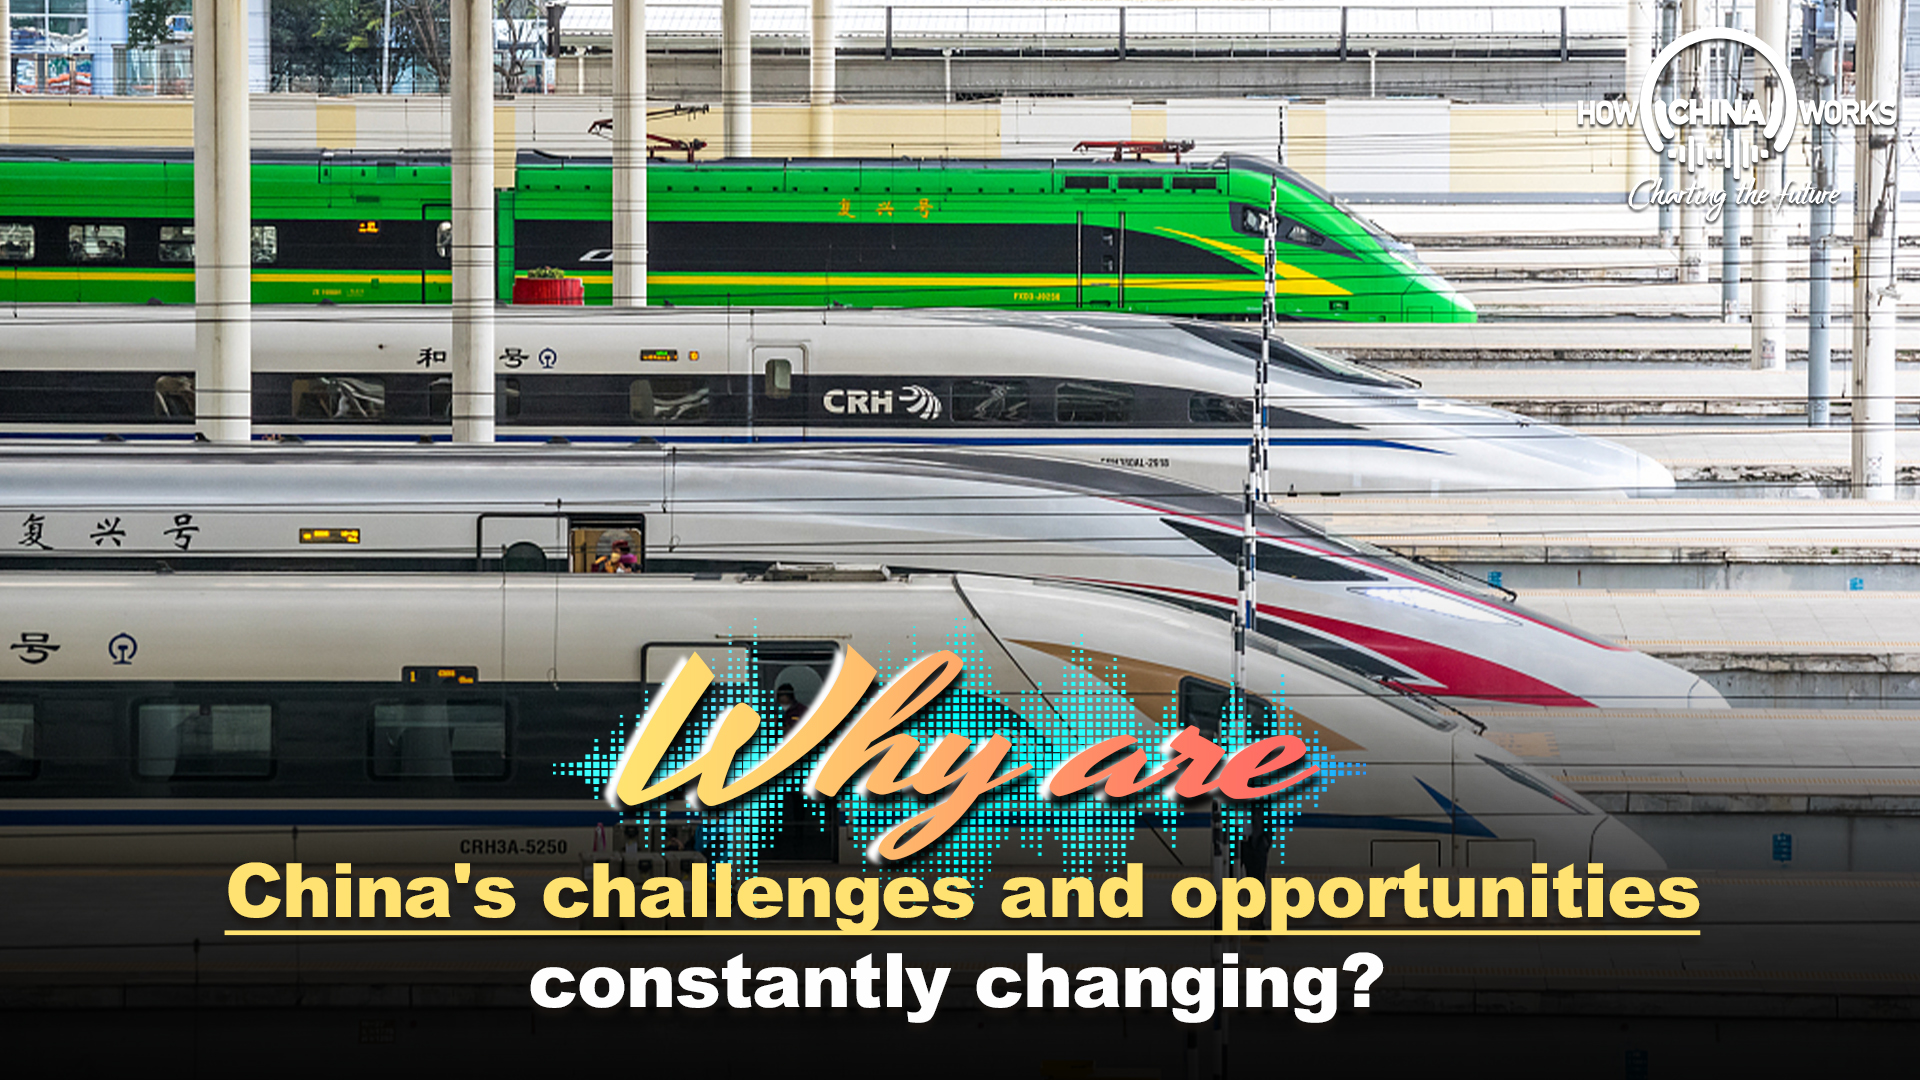 Why are China's challenges and opportunities constantly changing?